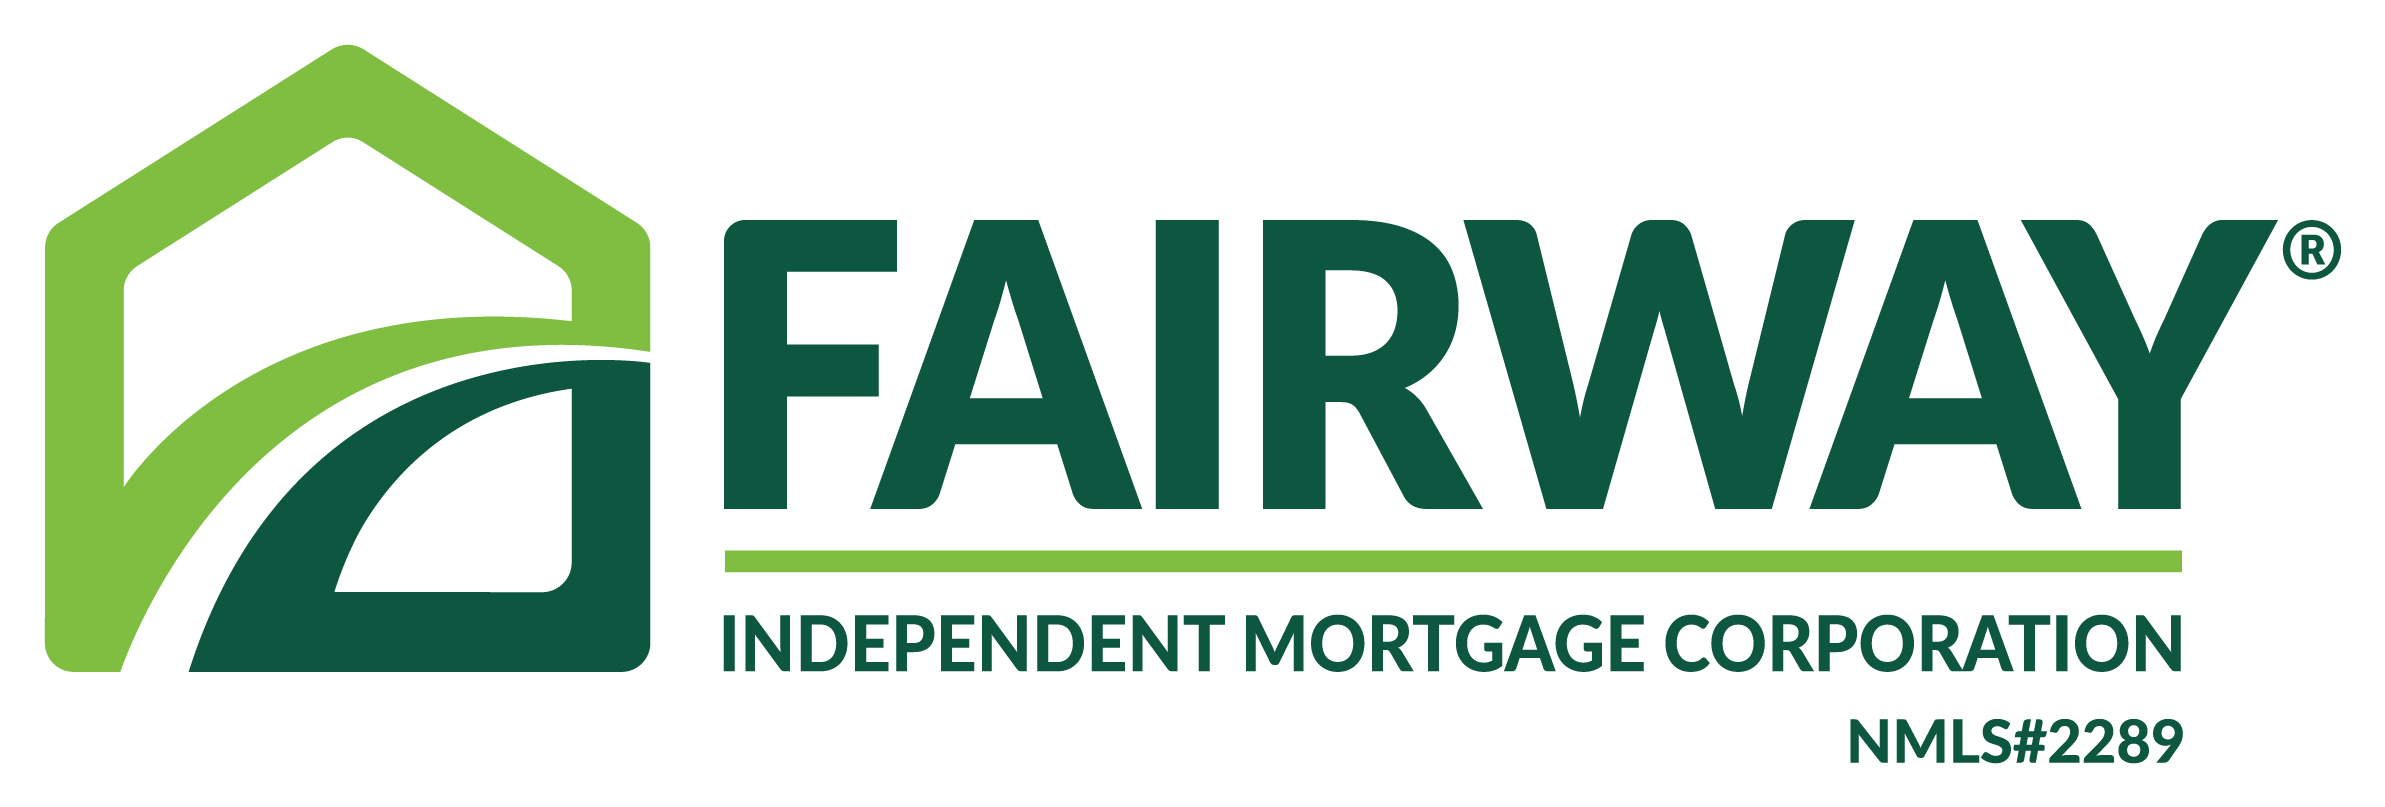 Fairway Independent Mortgage Corp Company Logo